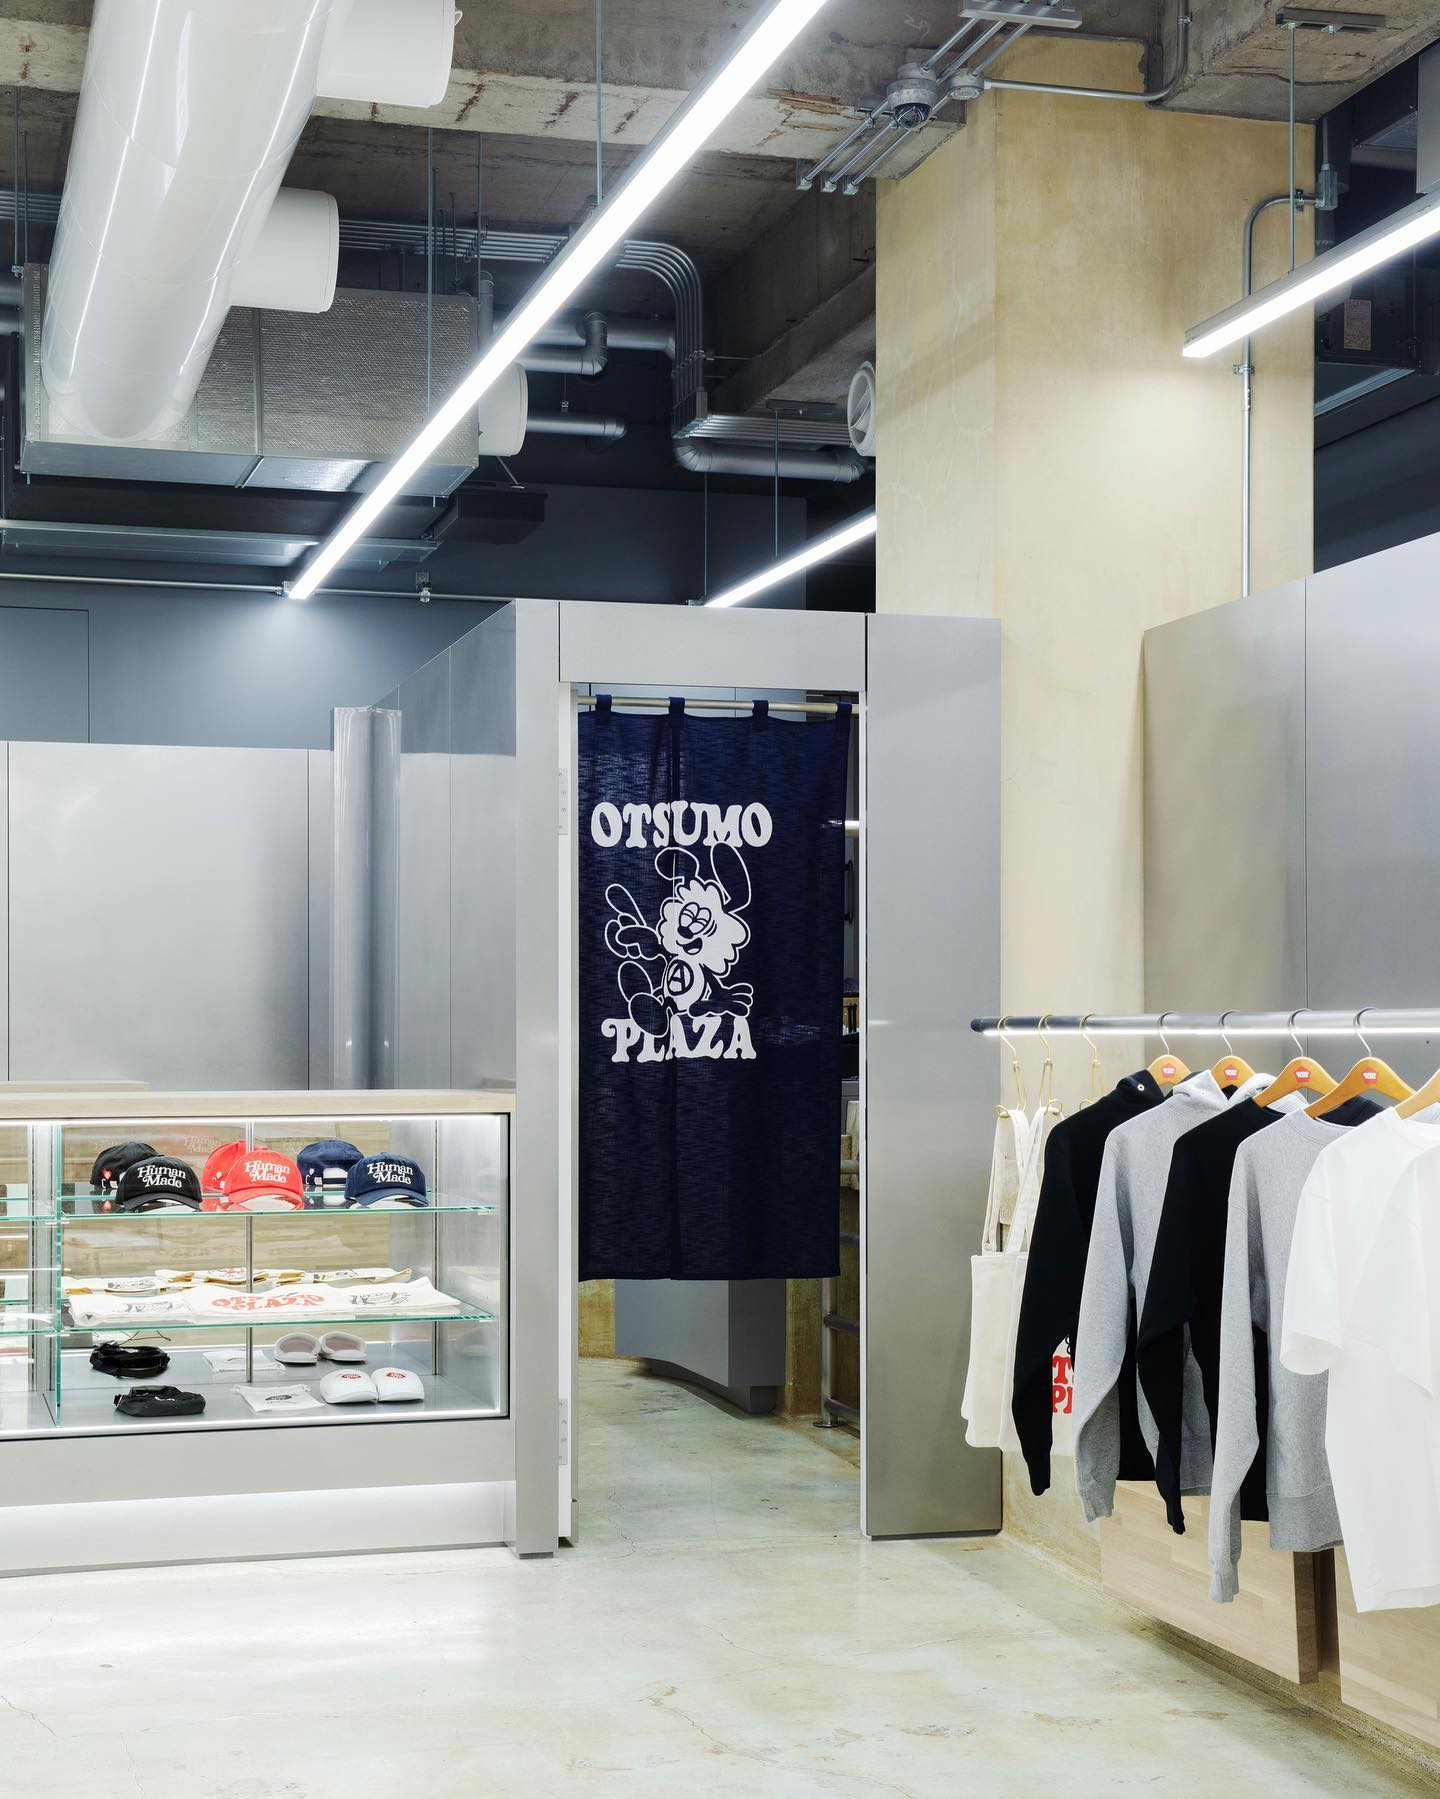 An inside look at NIGO and Verdy's OTSUMO PLAZA concept store